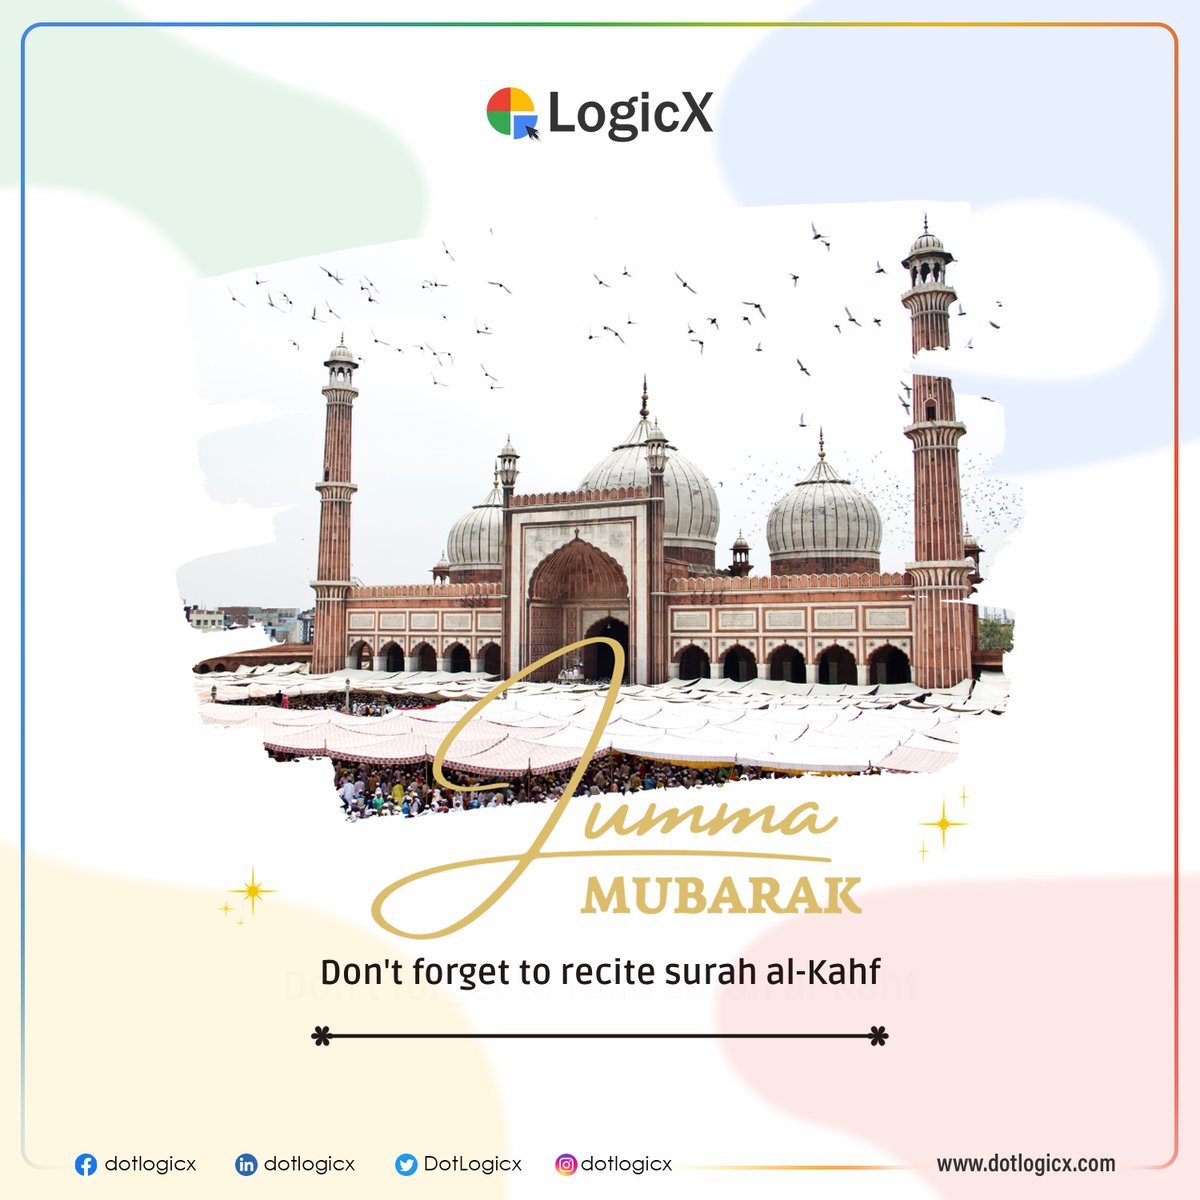 May Allah shower His countless blessings upon you and your loved ones on this sacred day. Jummah Mubarak!  

#dotlogicx #jummamubarak #blessedday #recitedurood